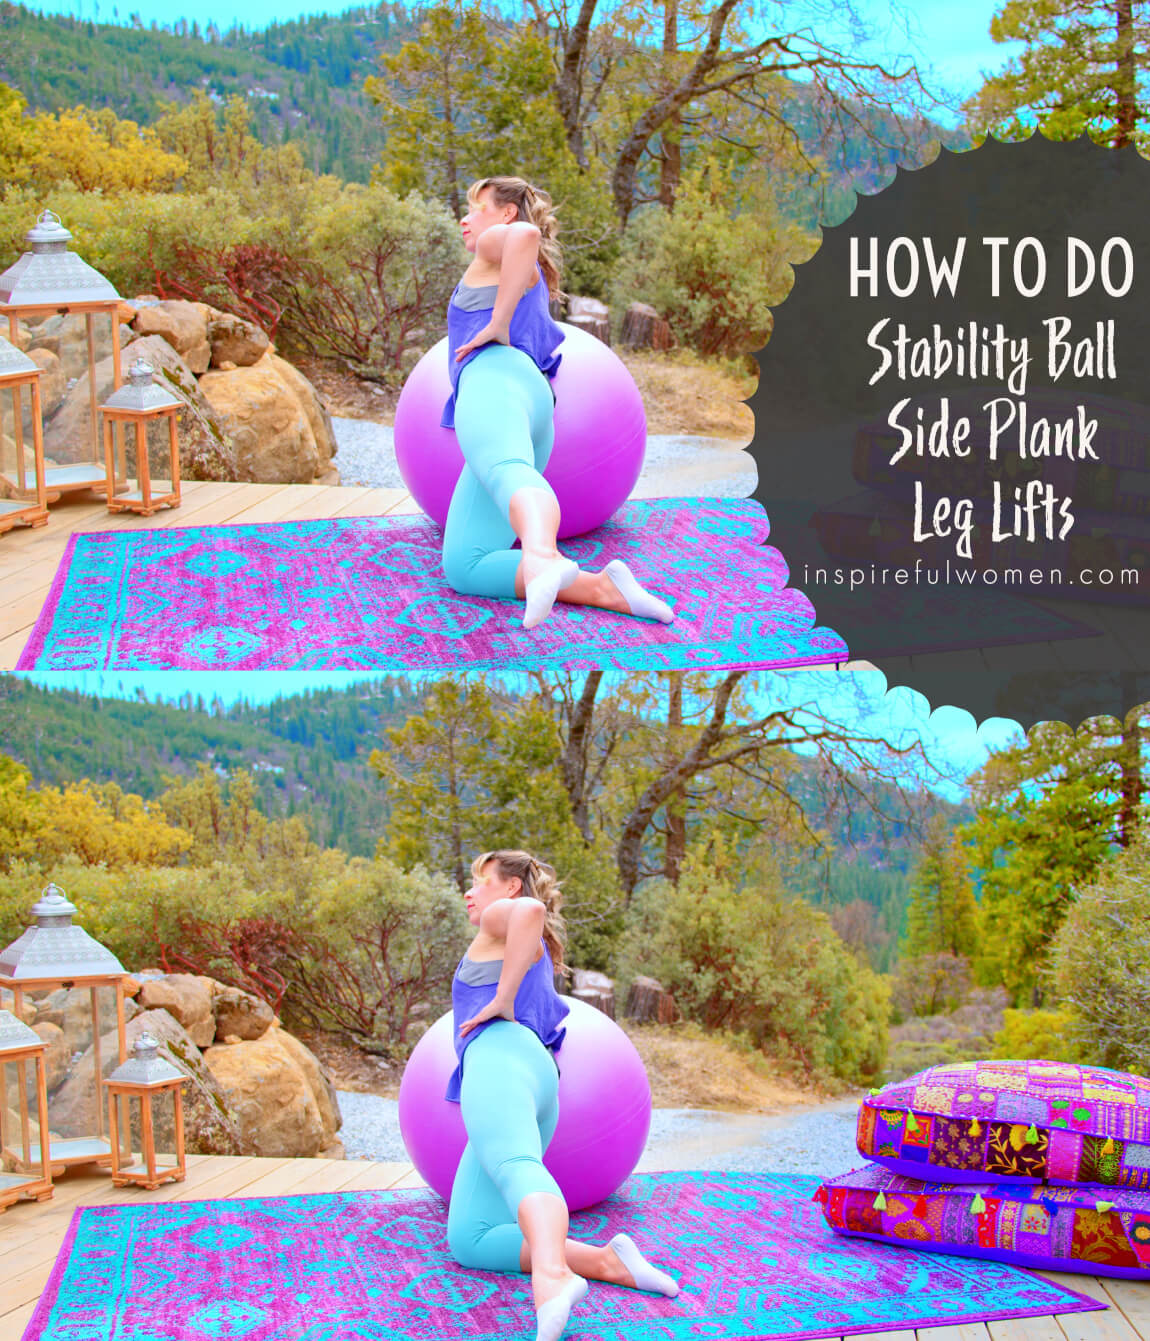 how-to-do-side-lying-plank-leg-lifts-on-stability-ball-glutes-workout-at-home-women-40+